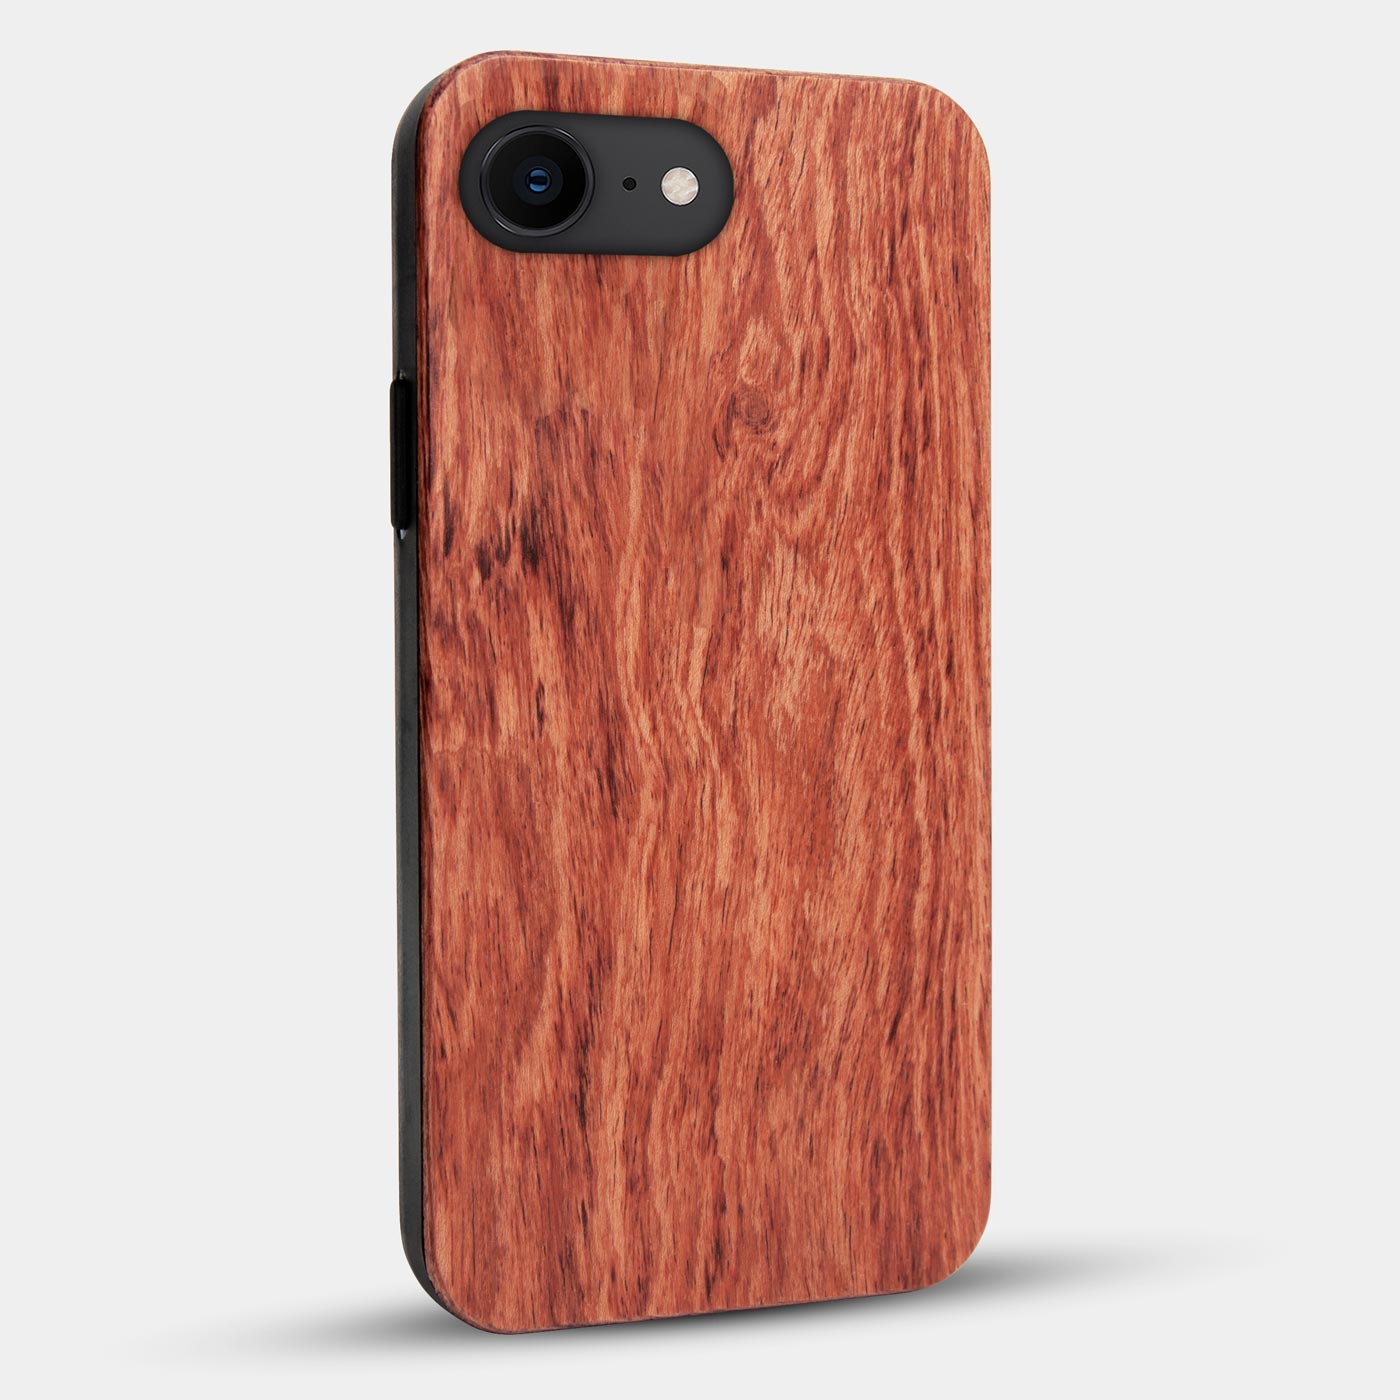 Best Custom Engraved Wood Vancouver Whitecaps FC iPhone SE Case - Engraved In Nature